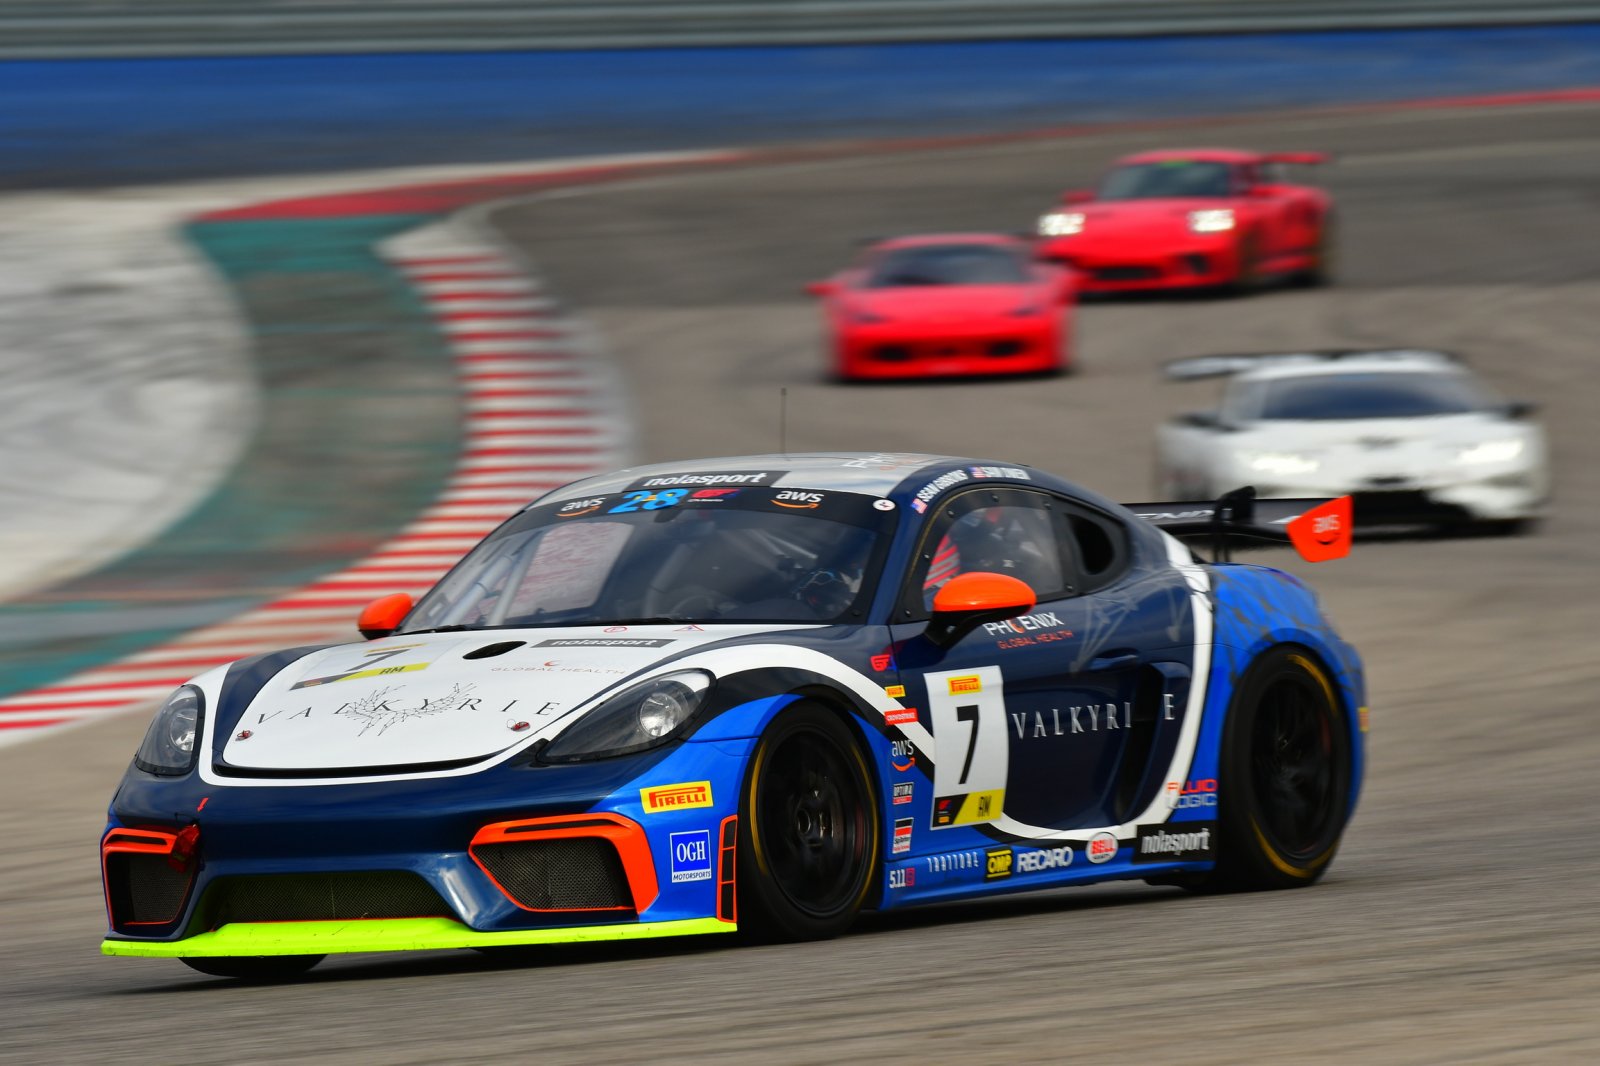 OGH Motorports Will Return to Pirelli GT4 America Competition in Partnership with NOLASPORT